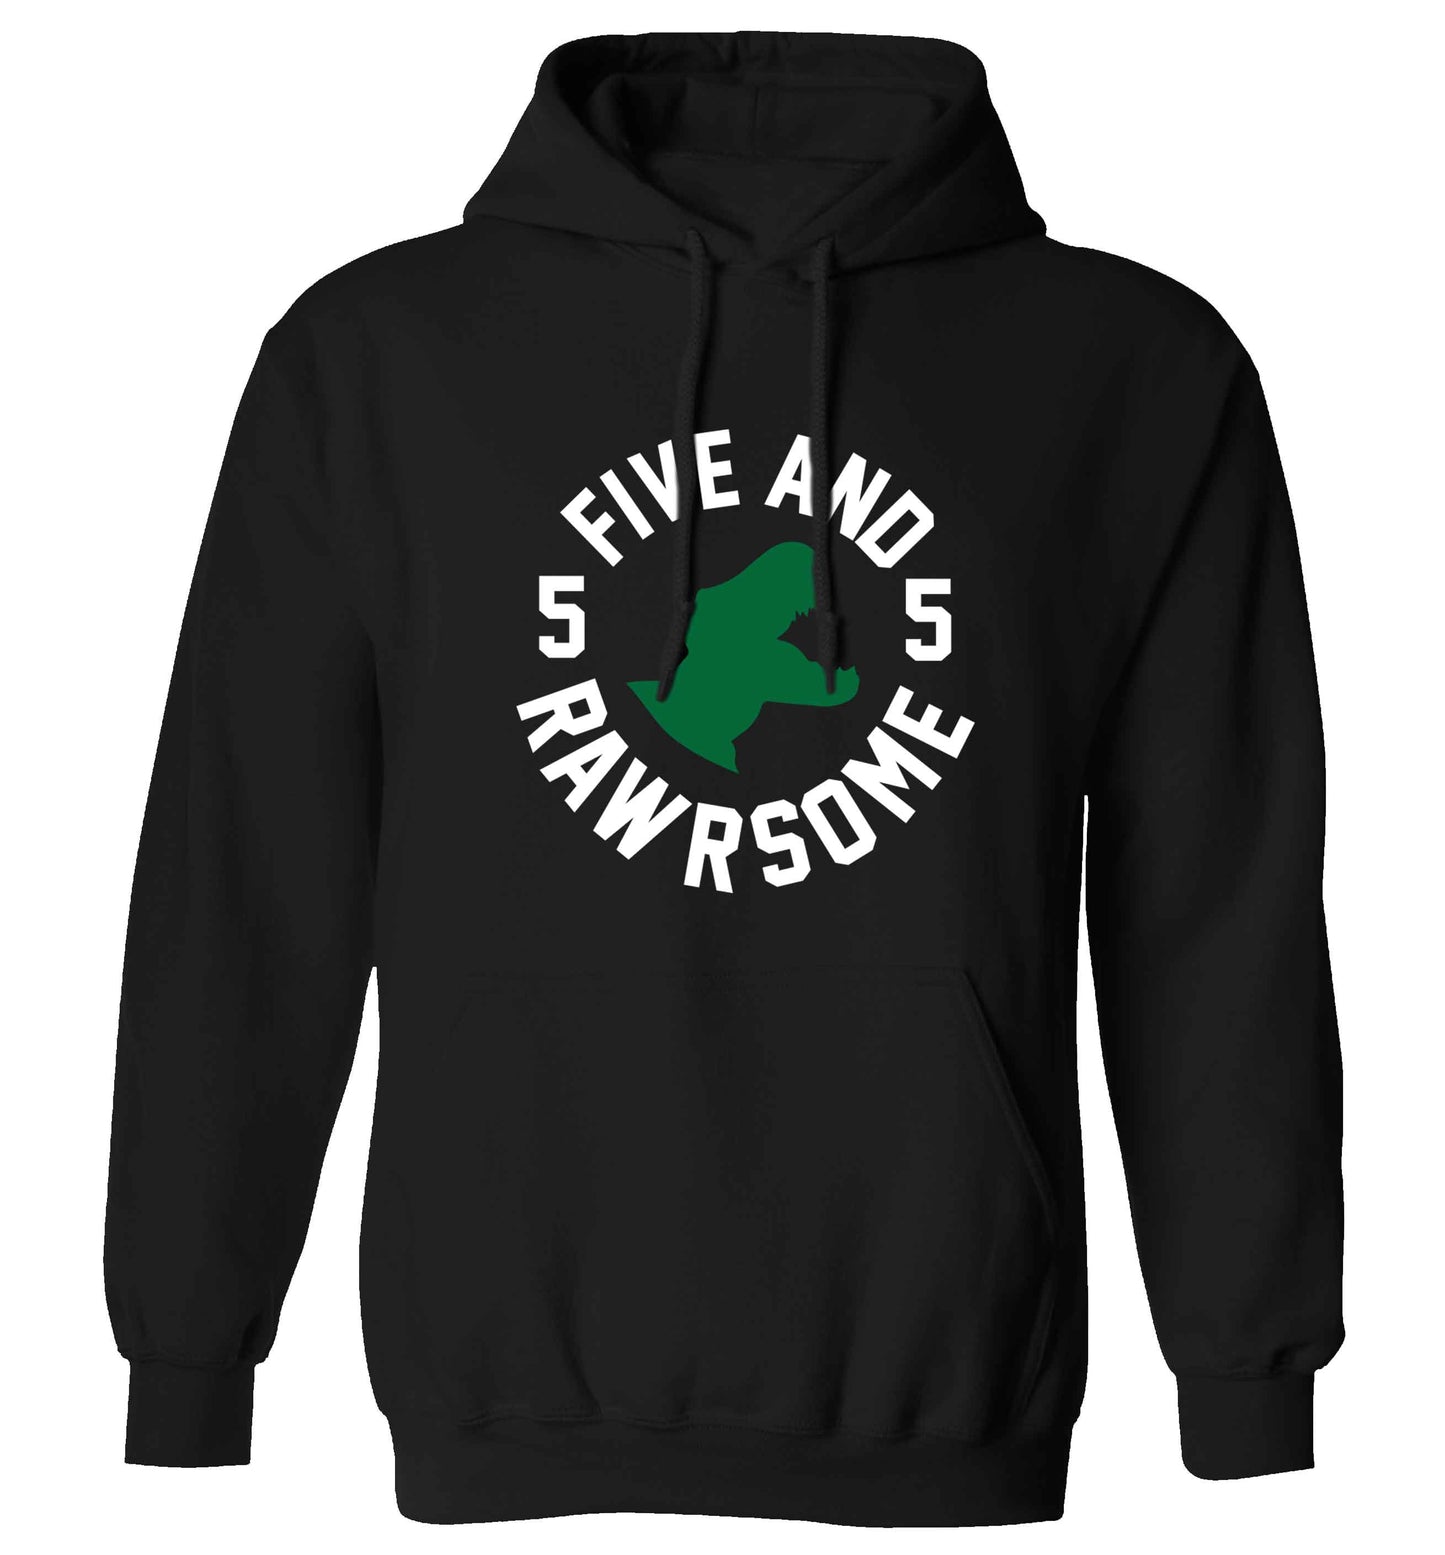 Five and rawrsome adults unisex black hoodie 2XL